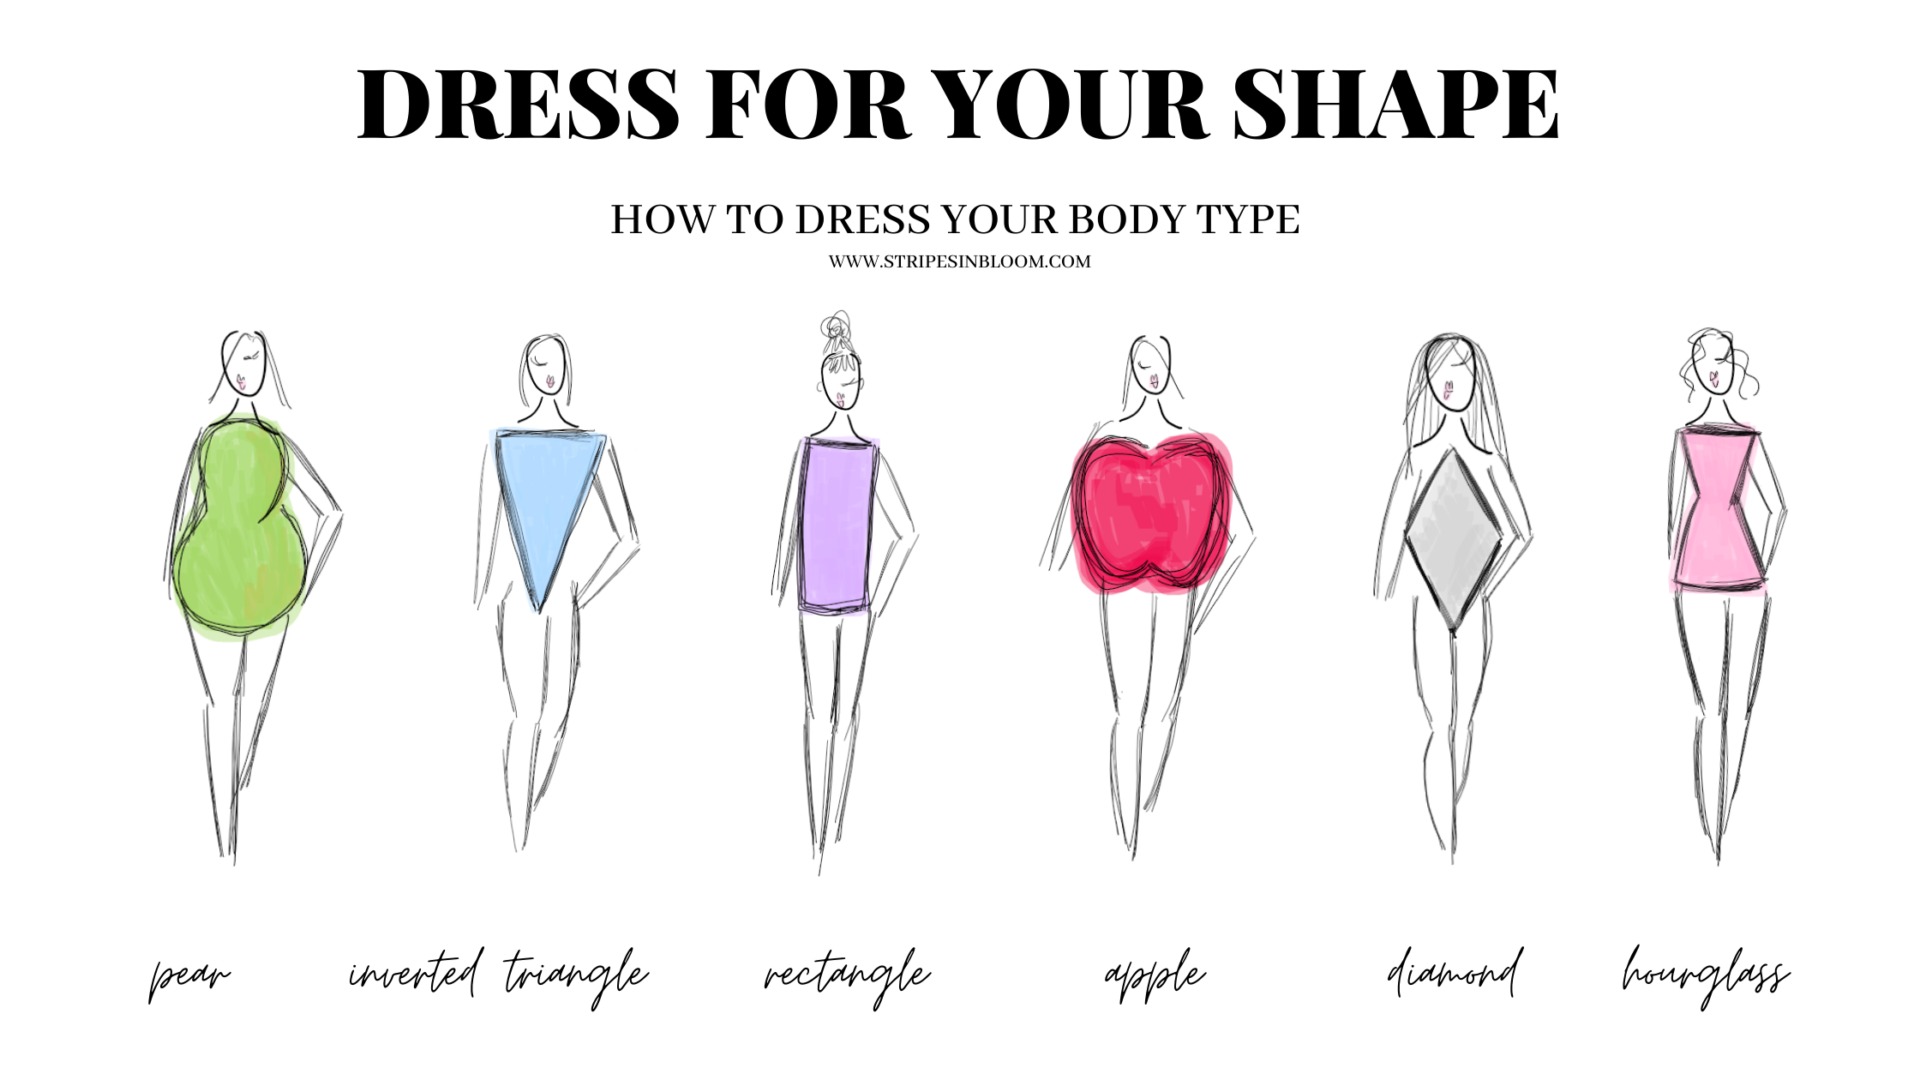 DRESS YOUR BODY TYPE  Stripes in Bloom